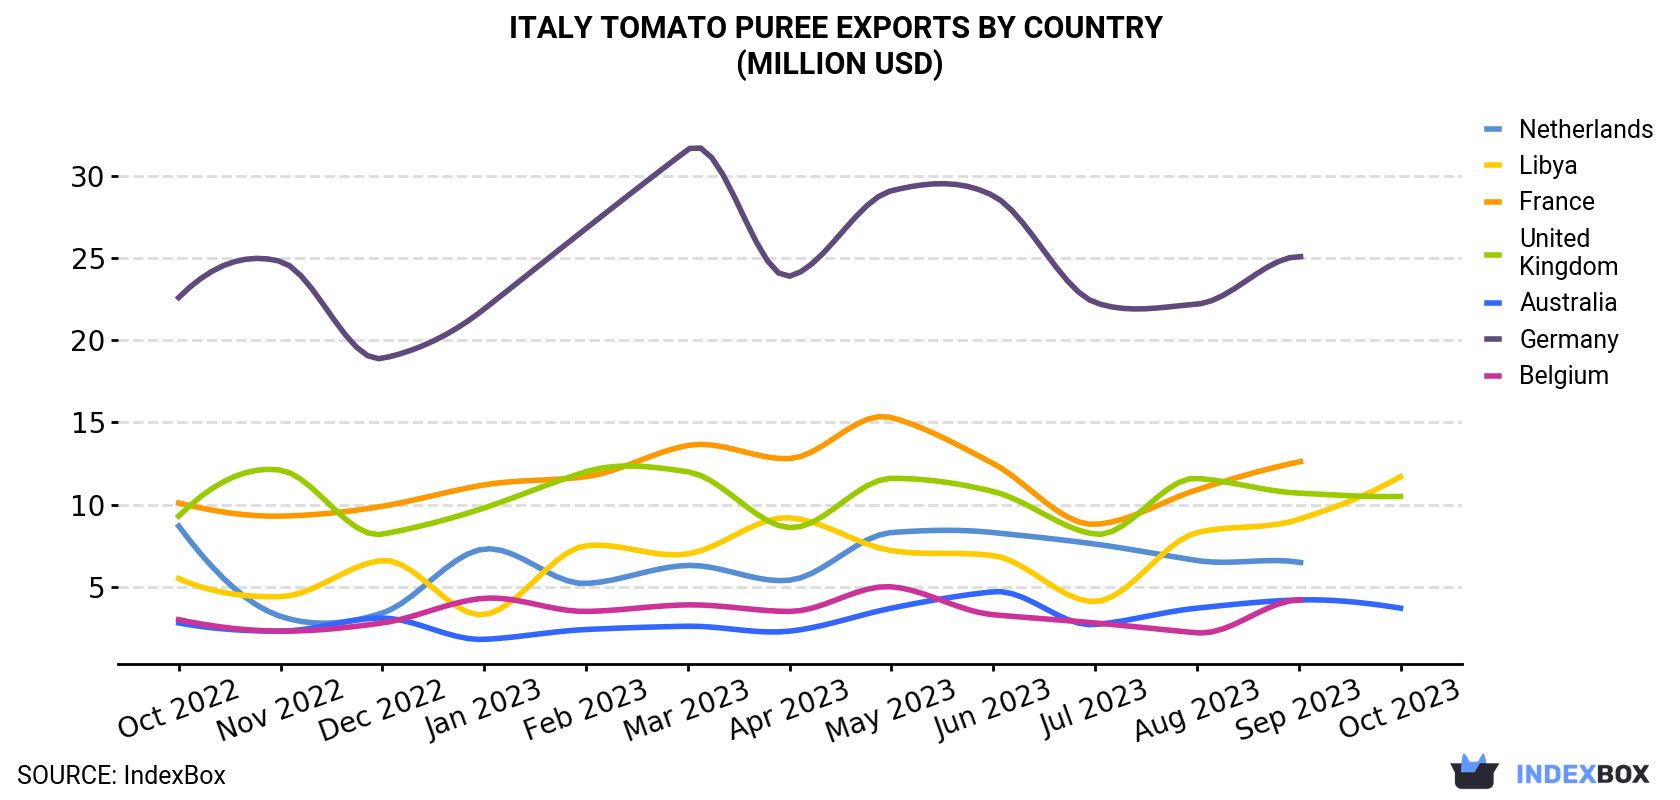 Italy Tomato Puree Exports By Country (Million USD)